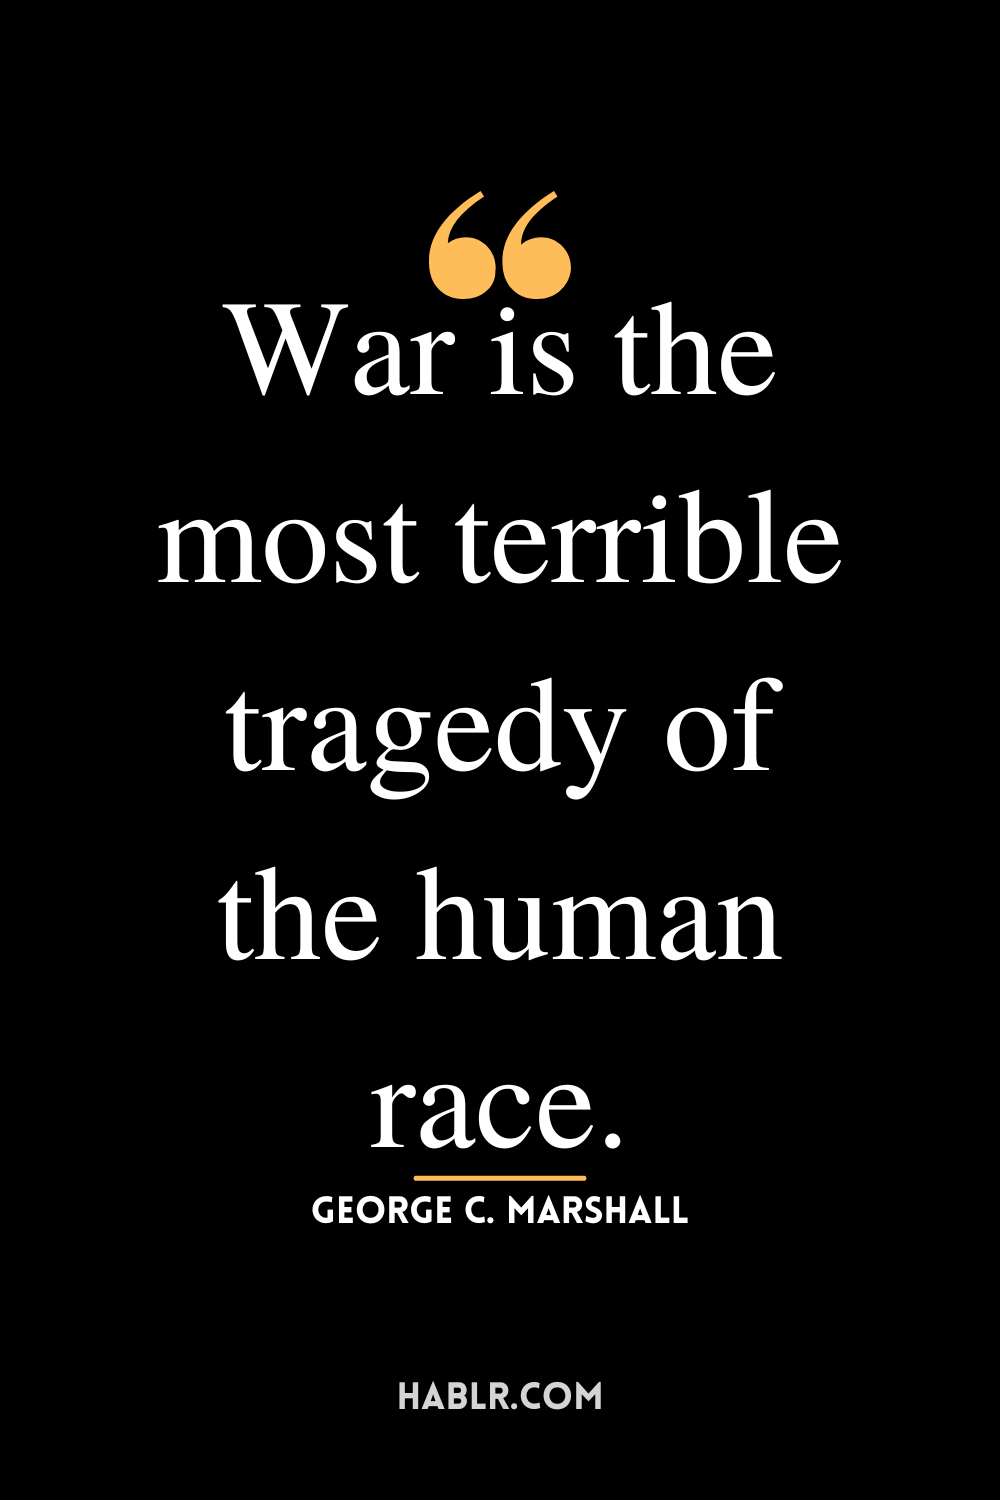 “War is the most terrible tragedy of the human race.” -George C. Marshall